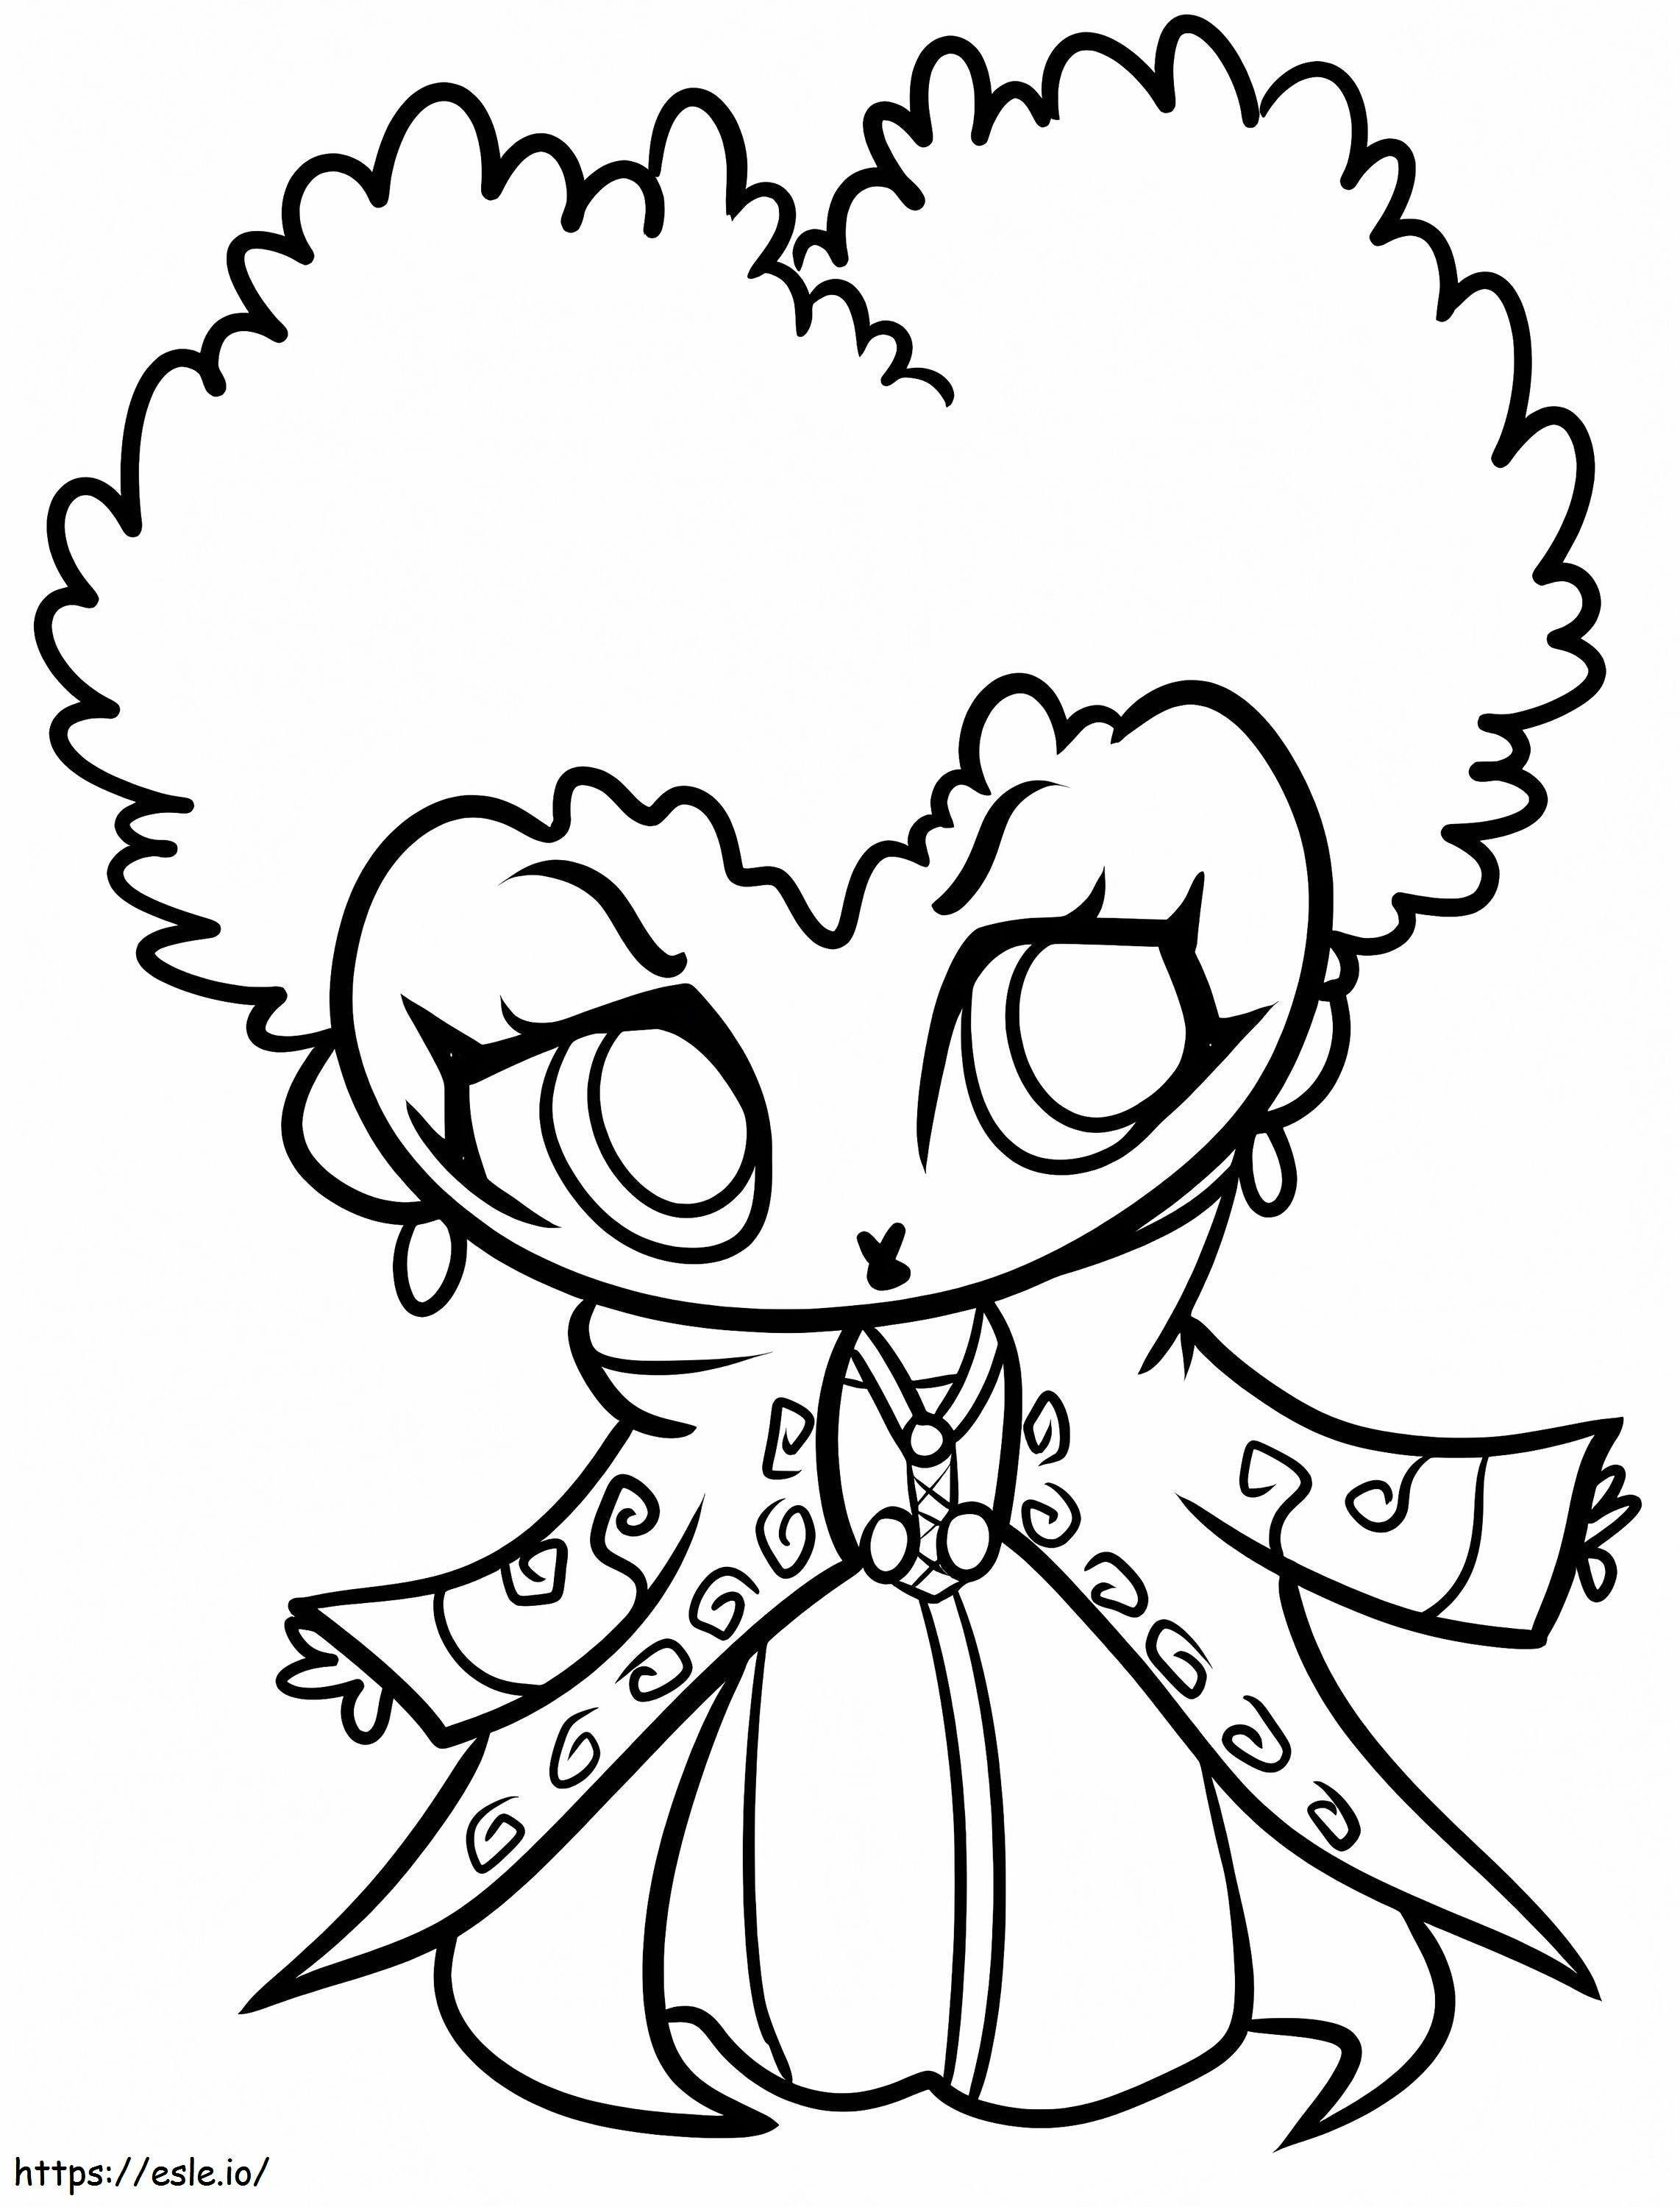 Chibi Winifred From Hocus Pocus coloring page